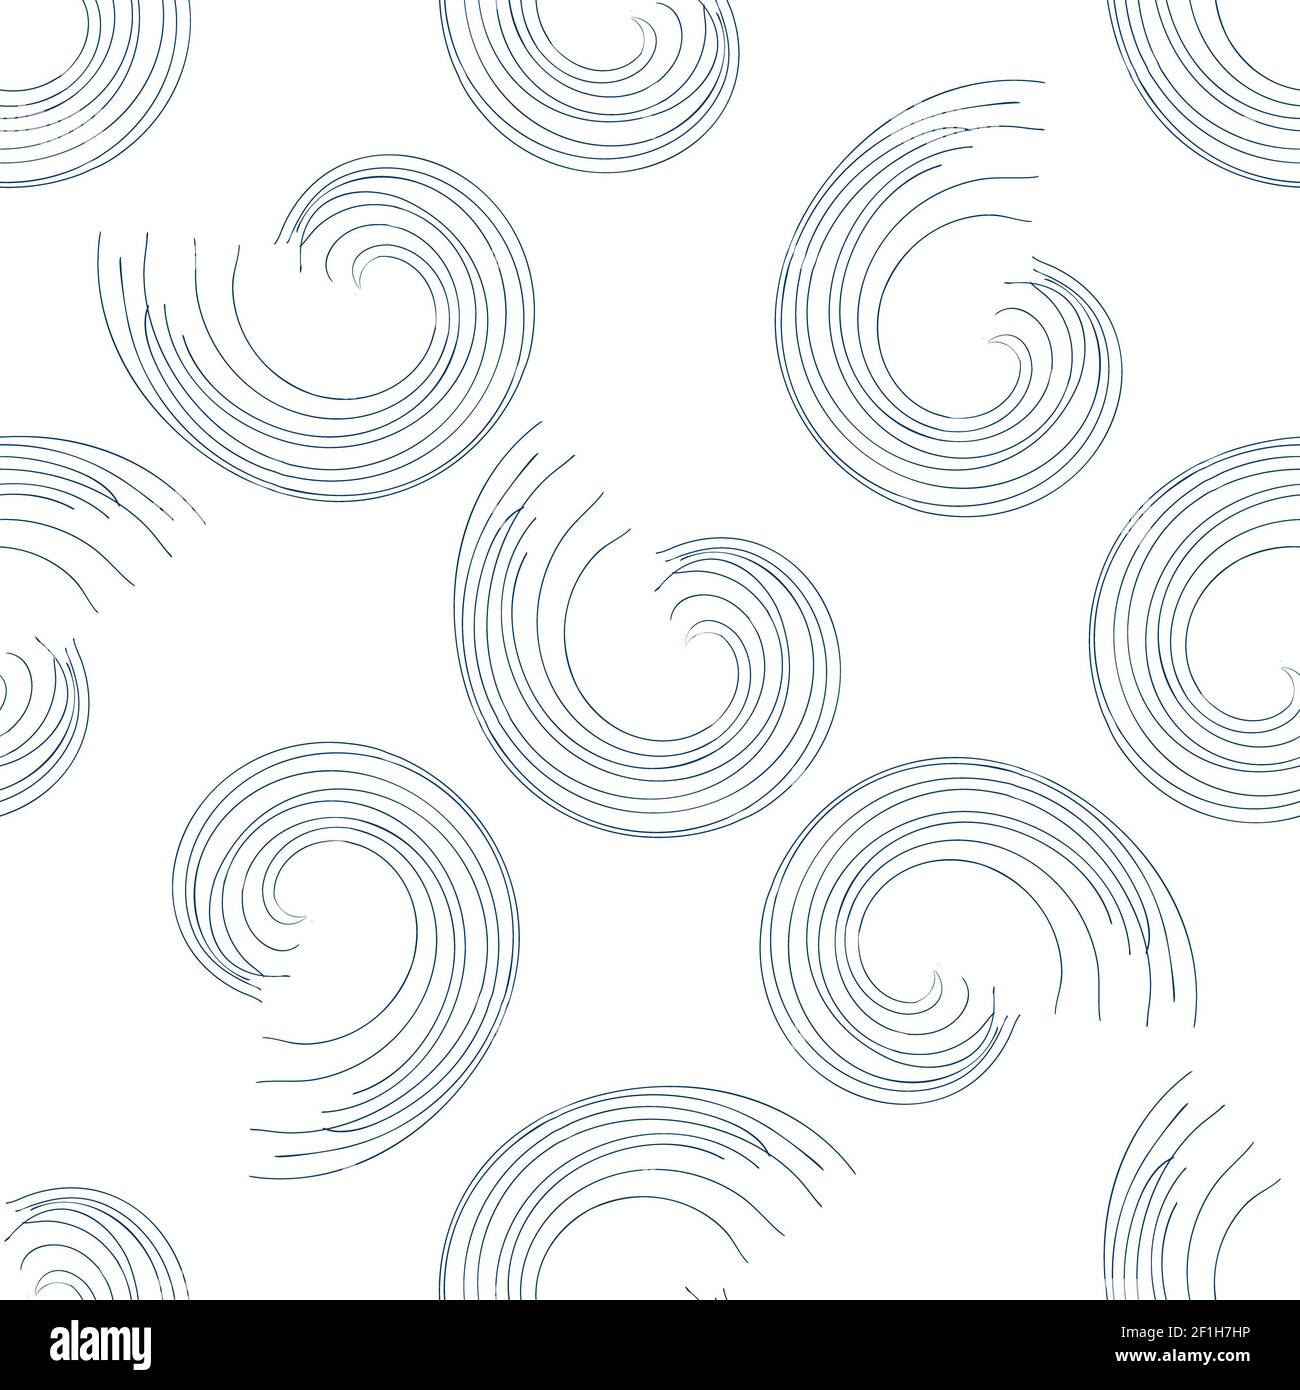 Seamless lines and circle pattern background. Stock Photo